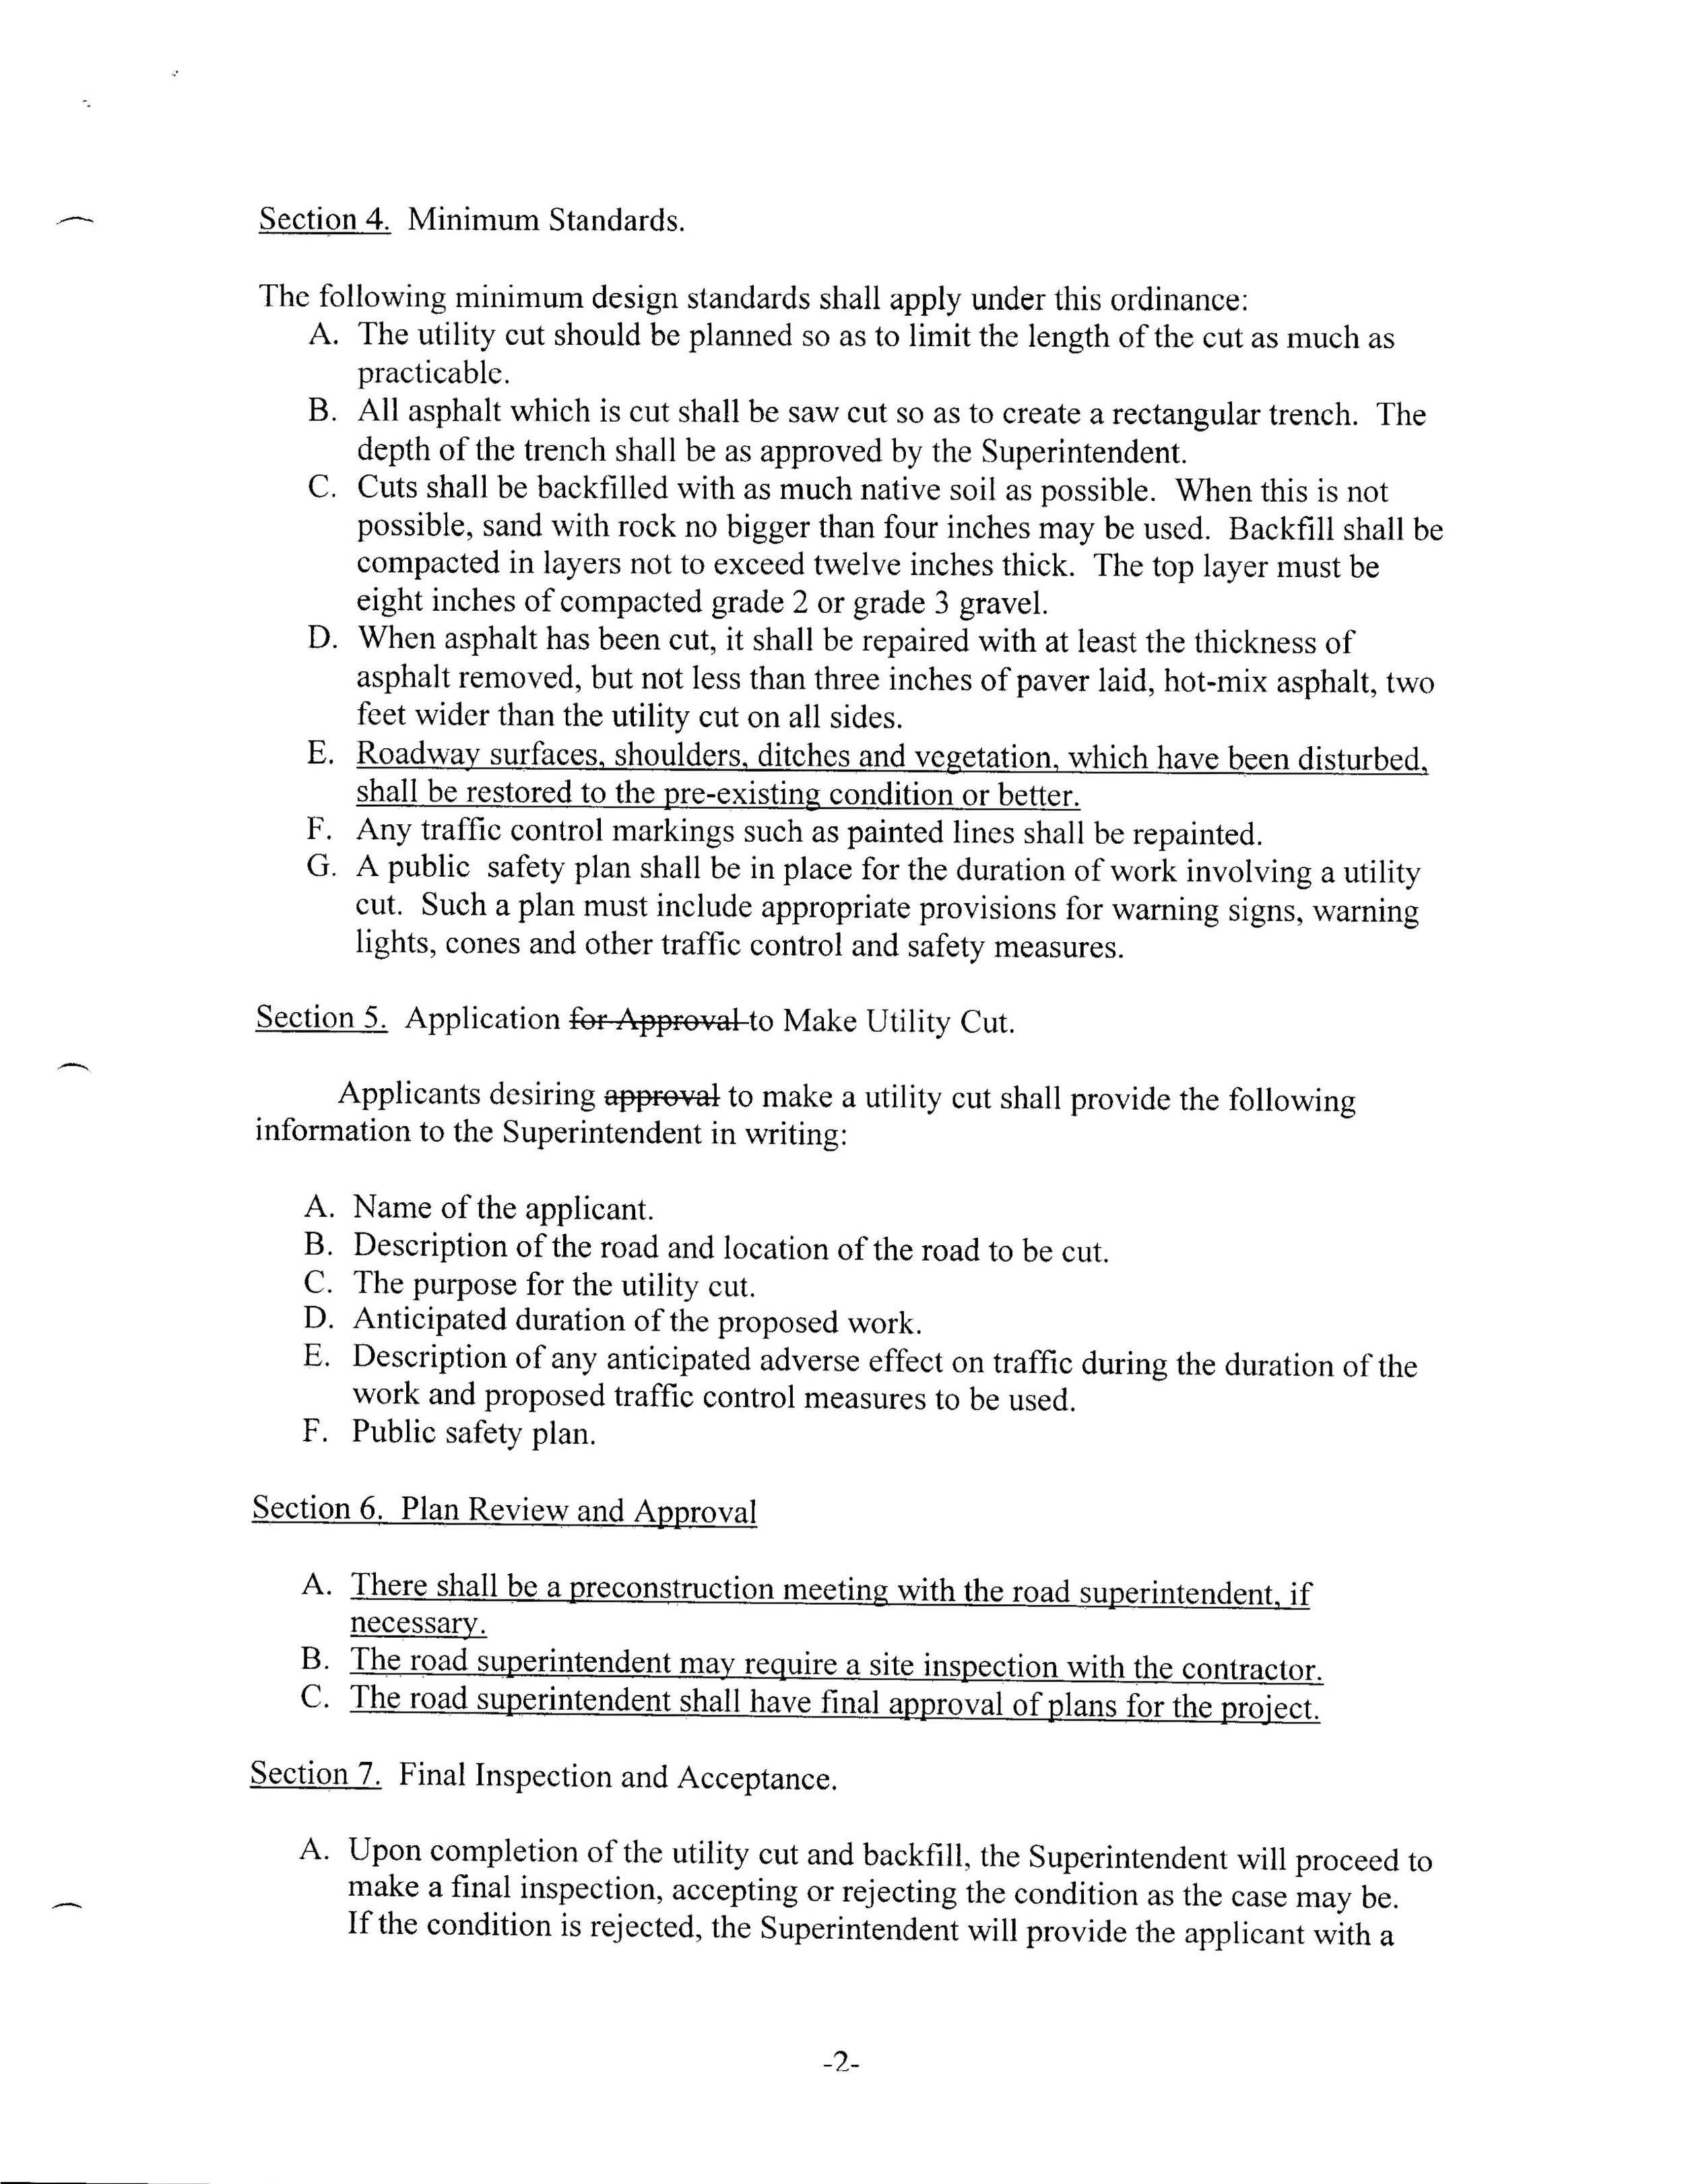 Utility-Cut-Ordinance_Page_2.png